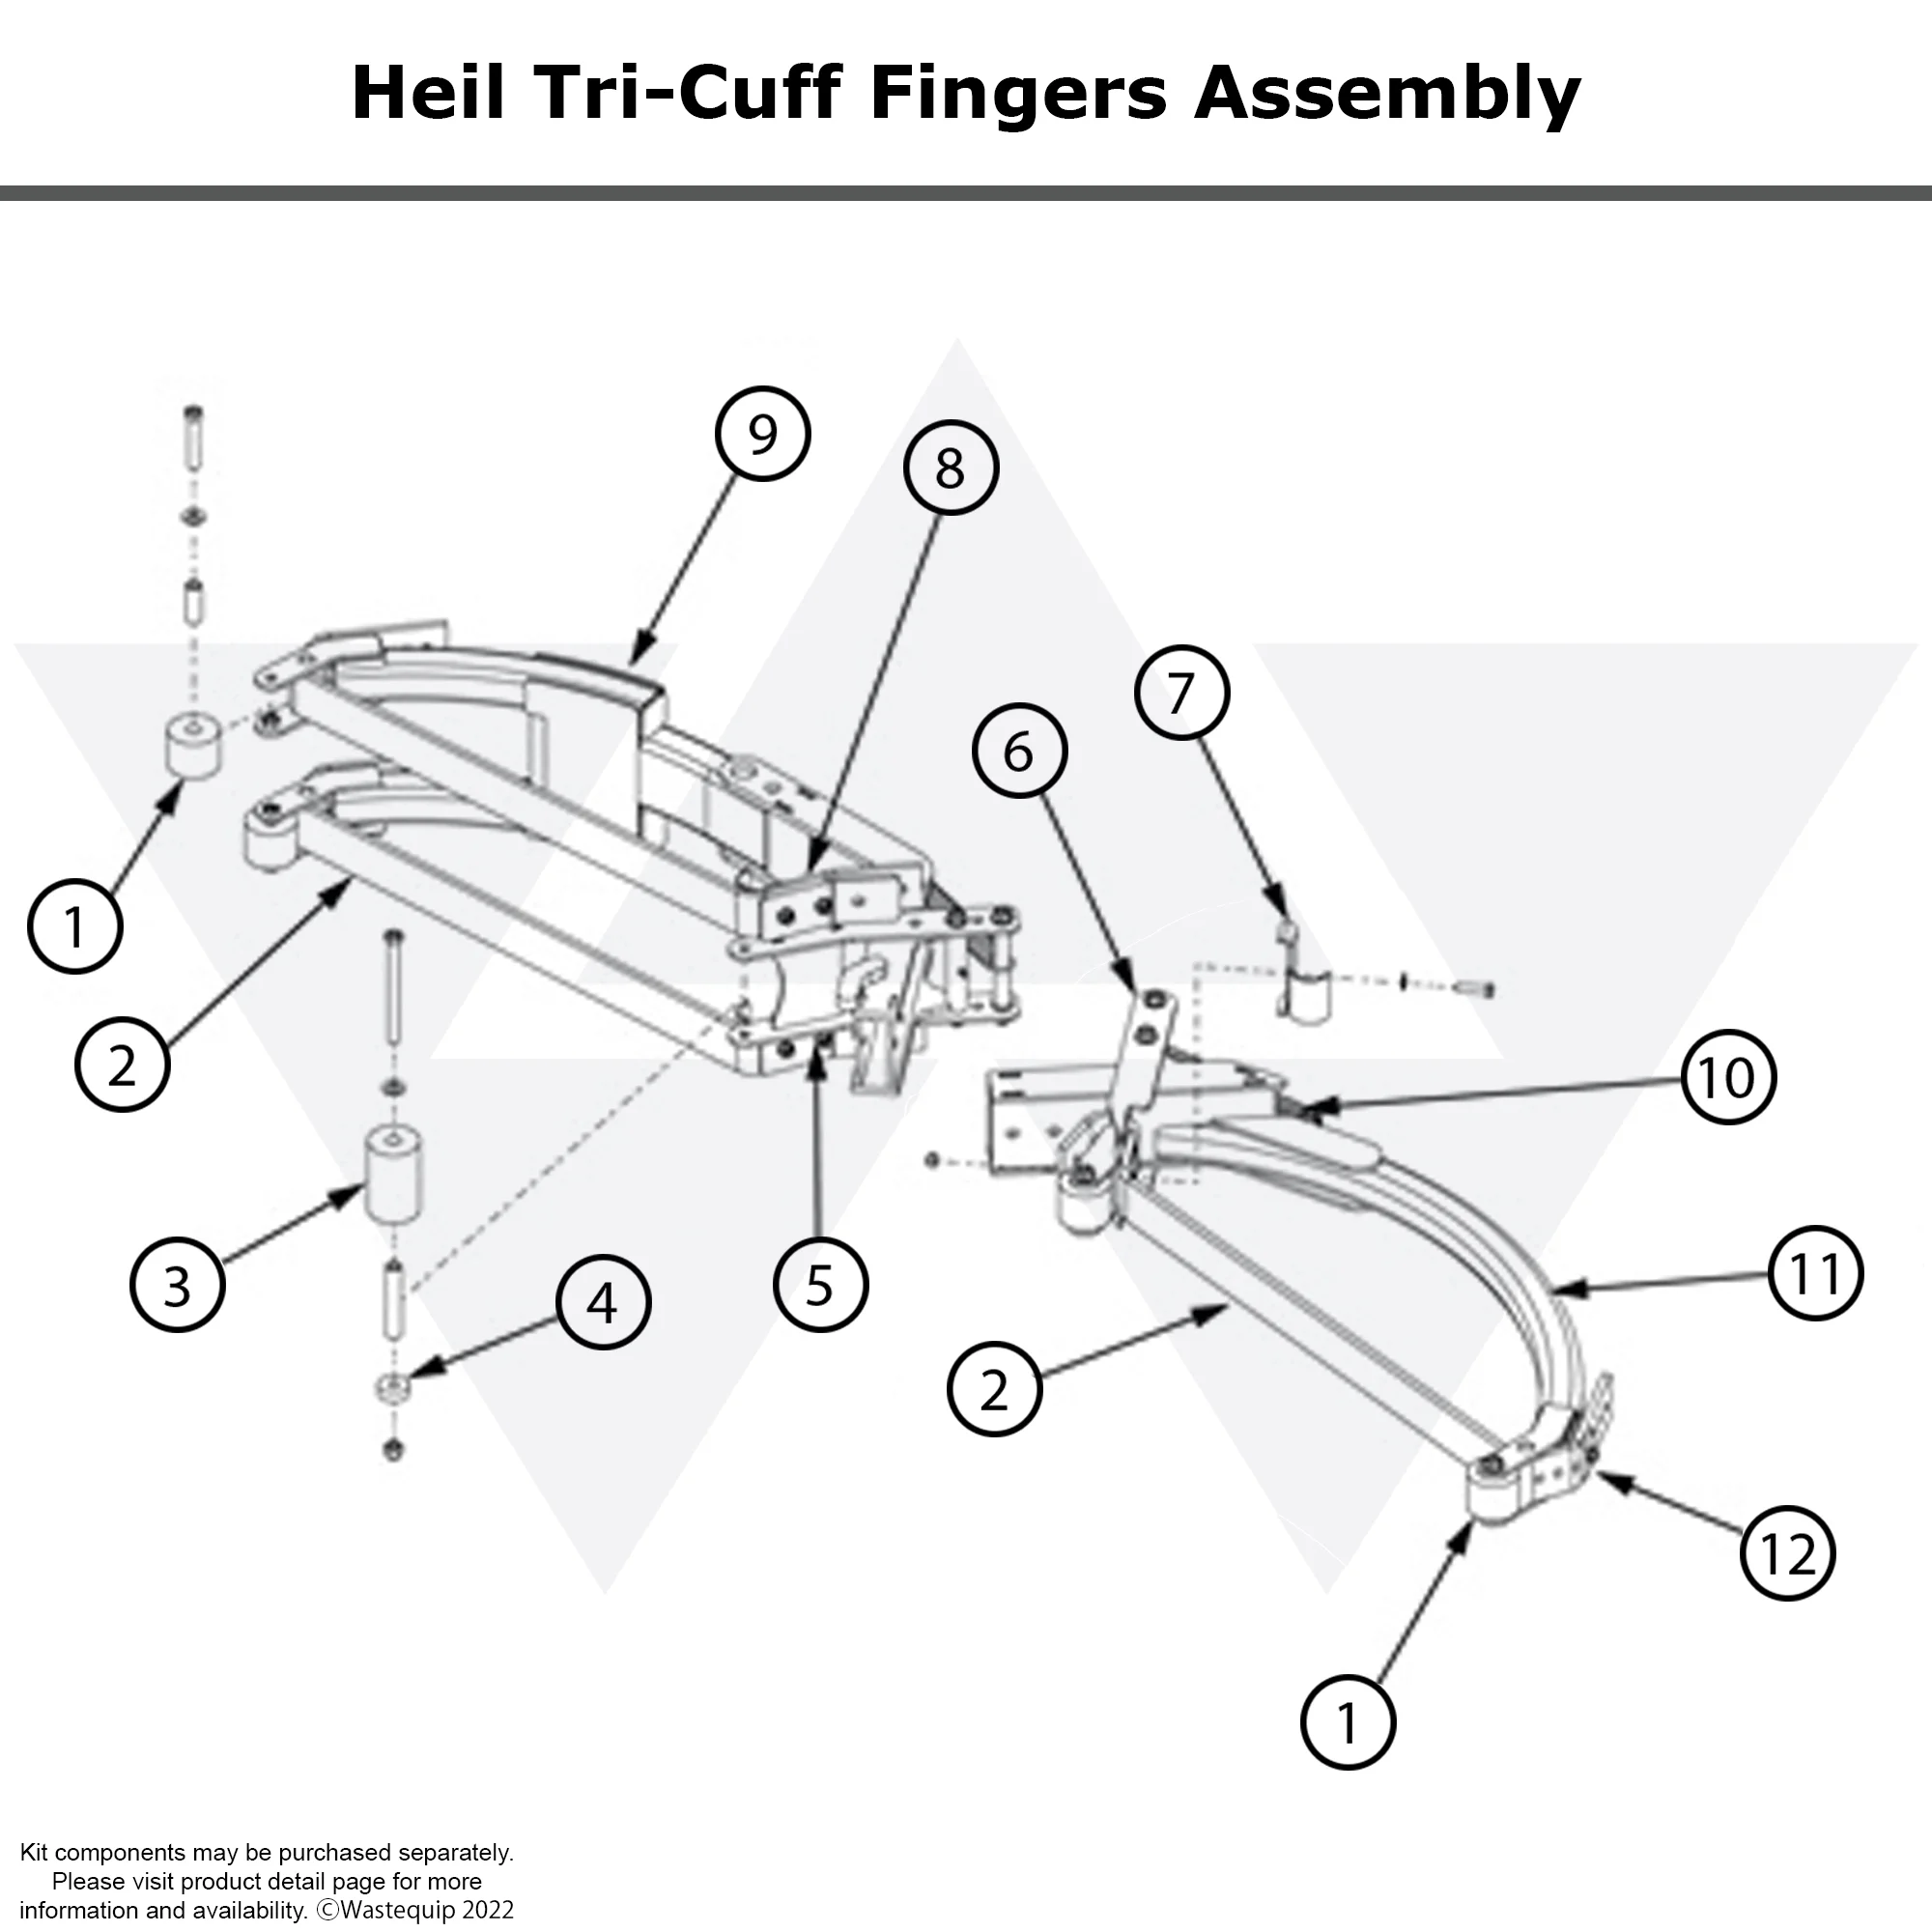 Wastebuilt® Replacement for Heil Tri-Cuff Fingers Assembly